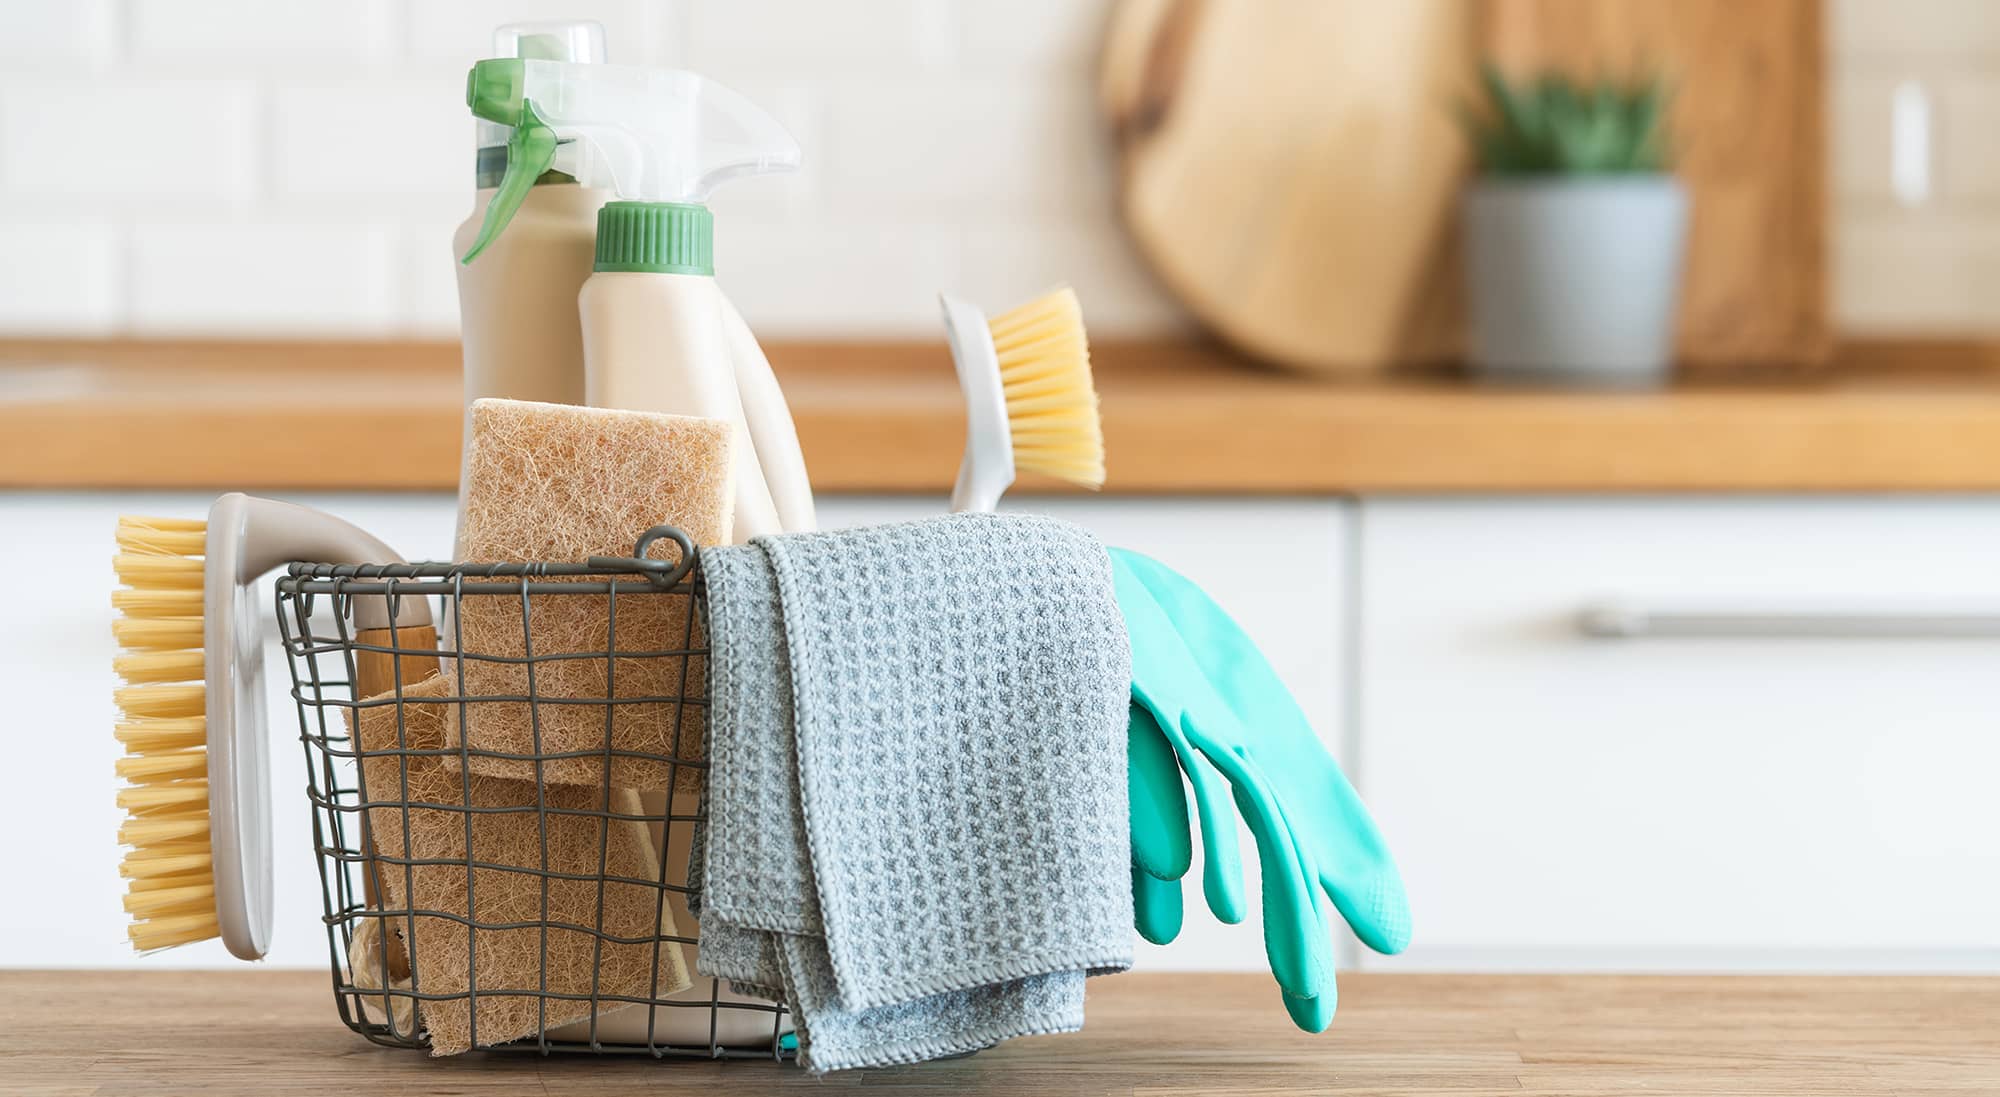 Shop for natural and organic cleaning products, showing a basket of supplies 